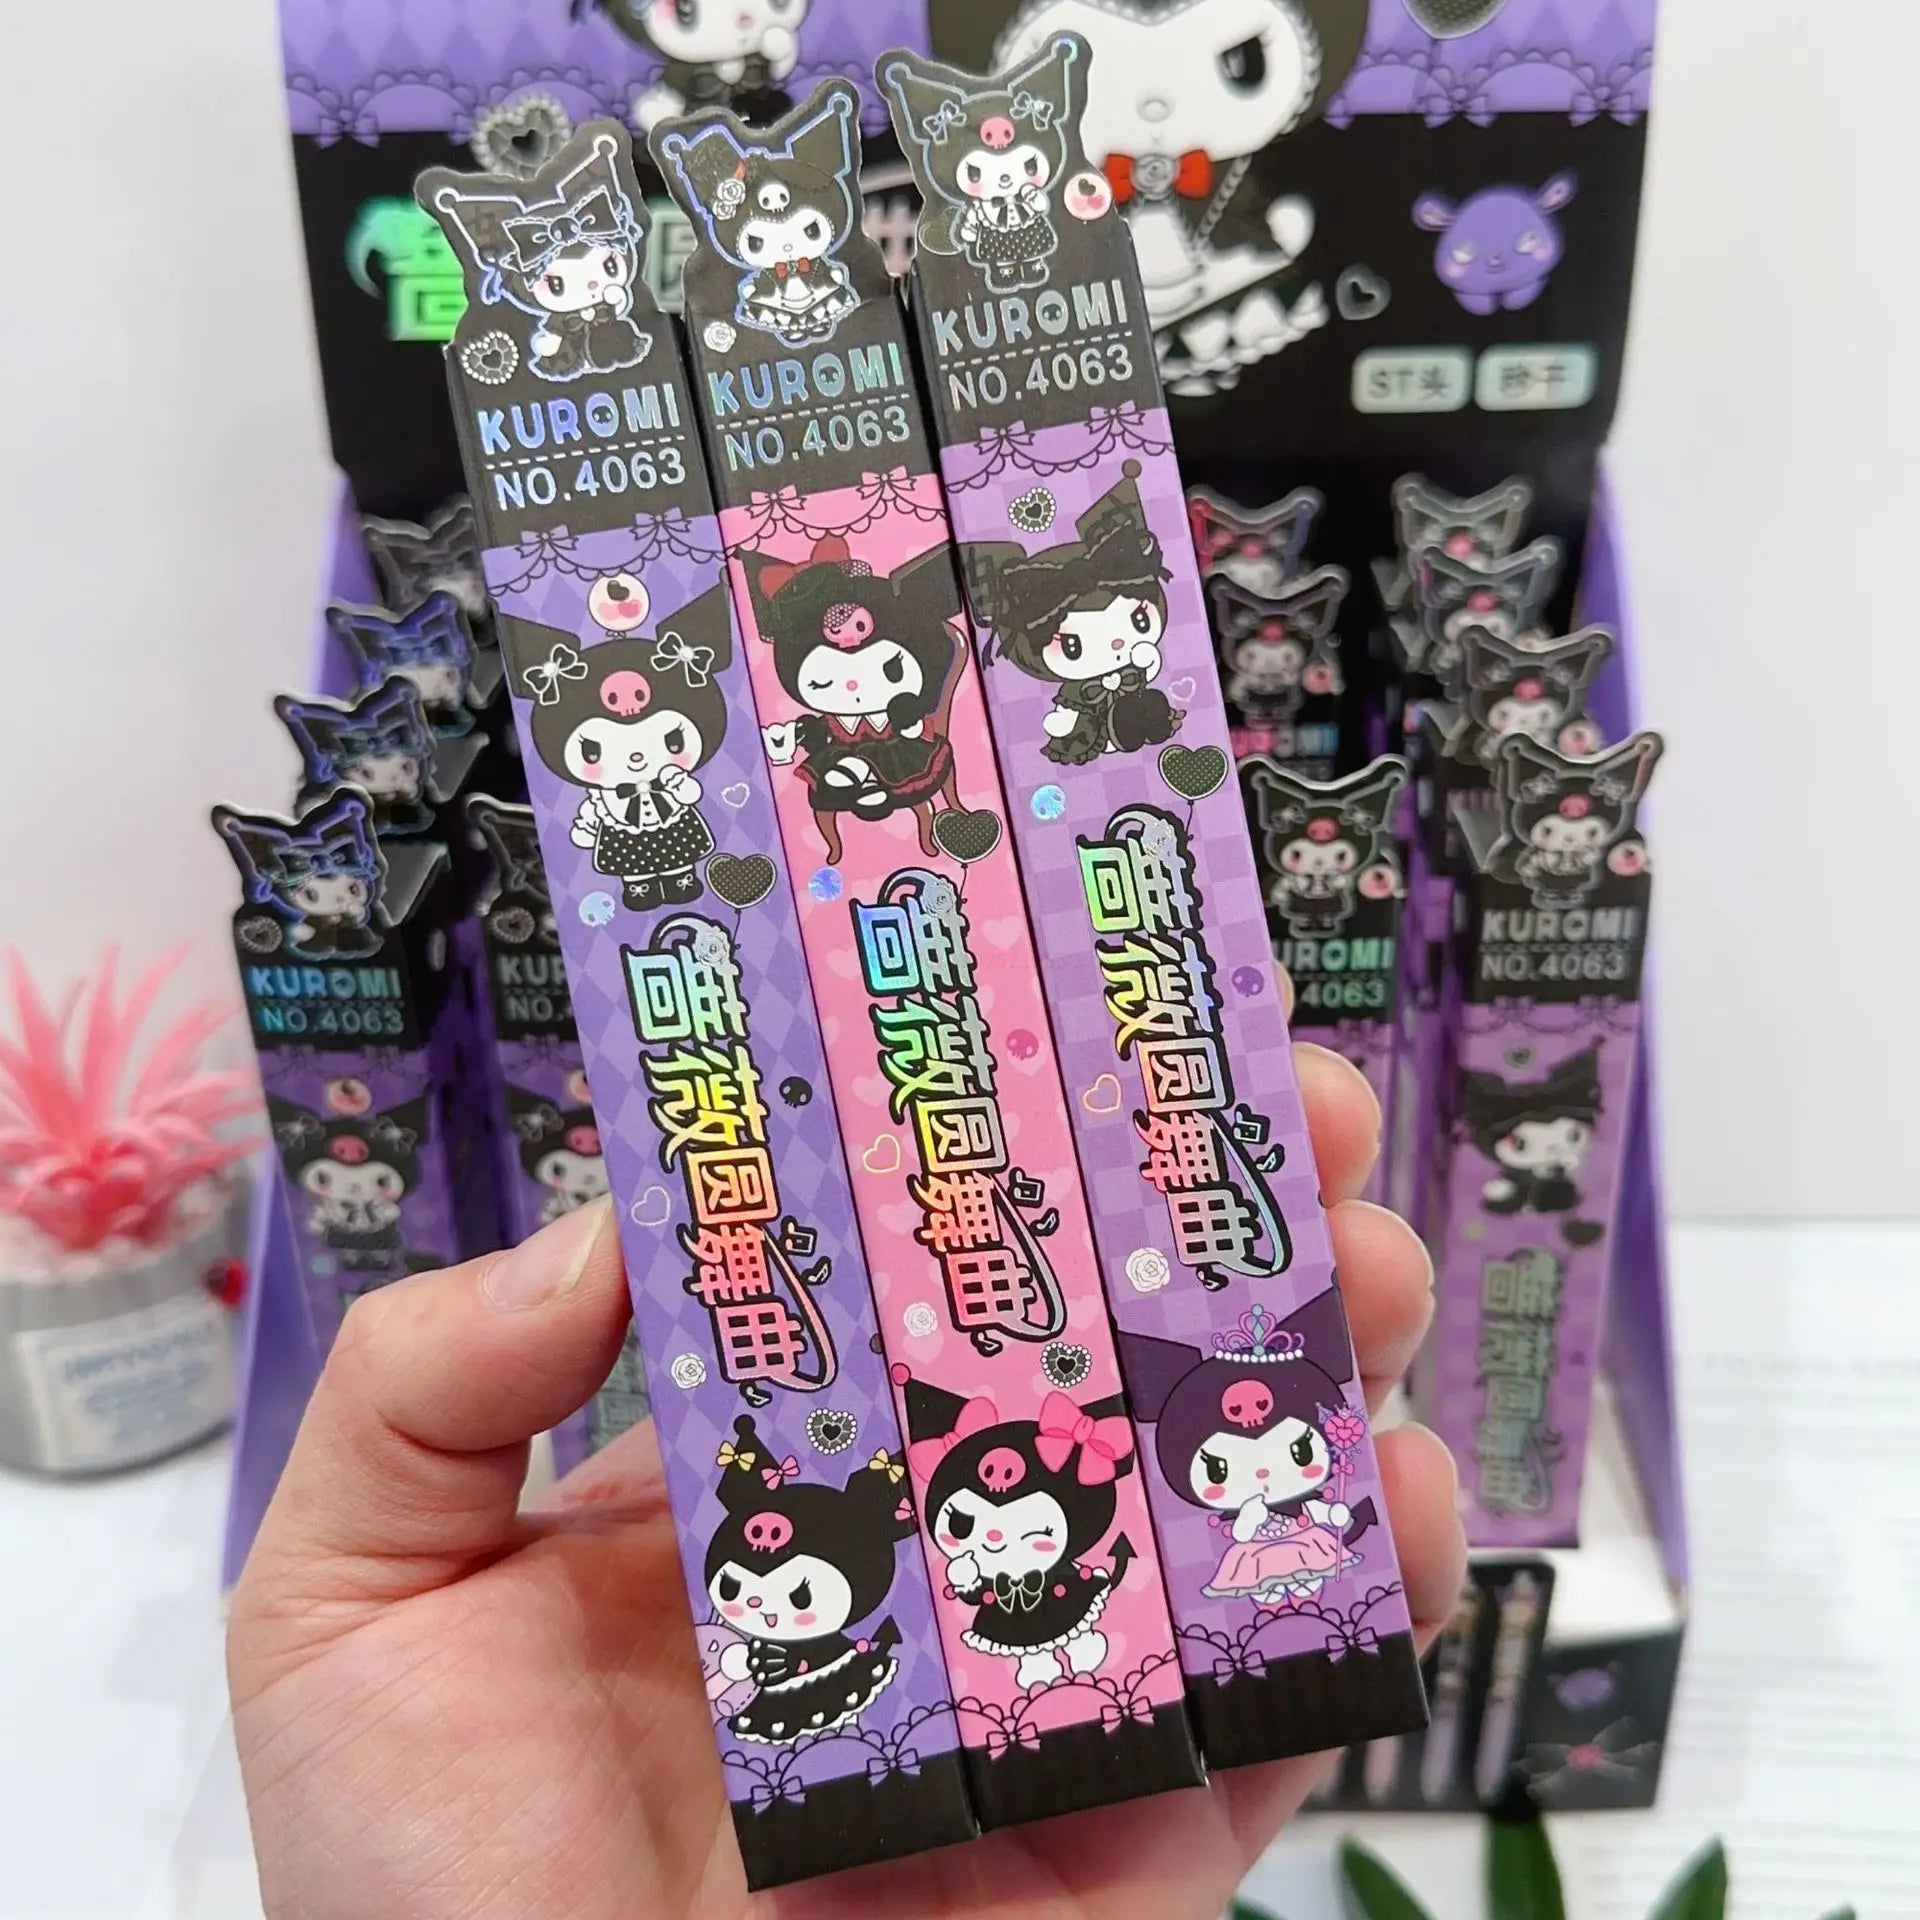 A hand holding a Kuromi - Waltz of the Roses blind box pen, surrounded by colorful candy and cartoon character boxes, embodying Strangecat Toys' blind box and art toy store essence.